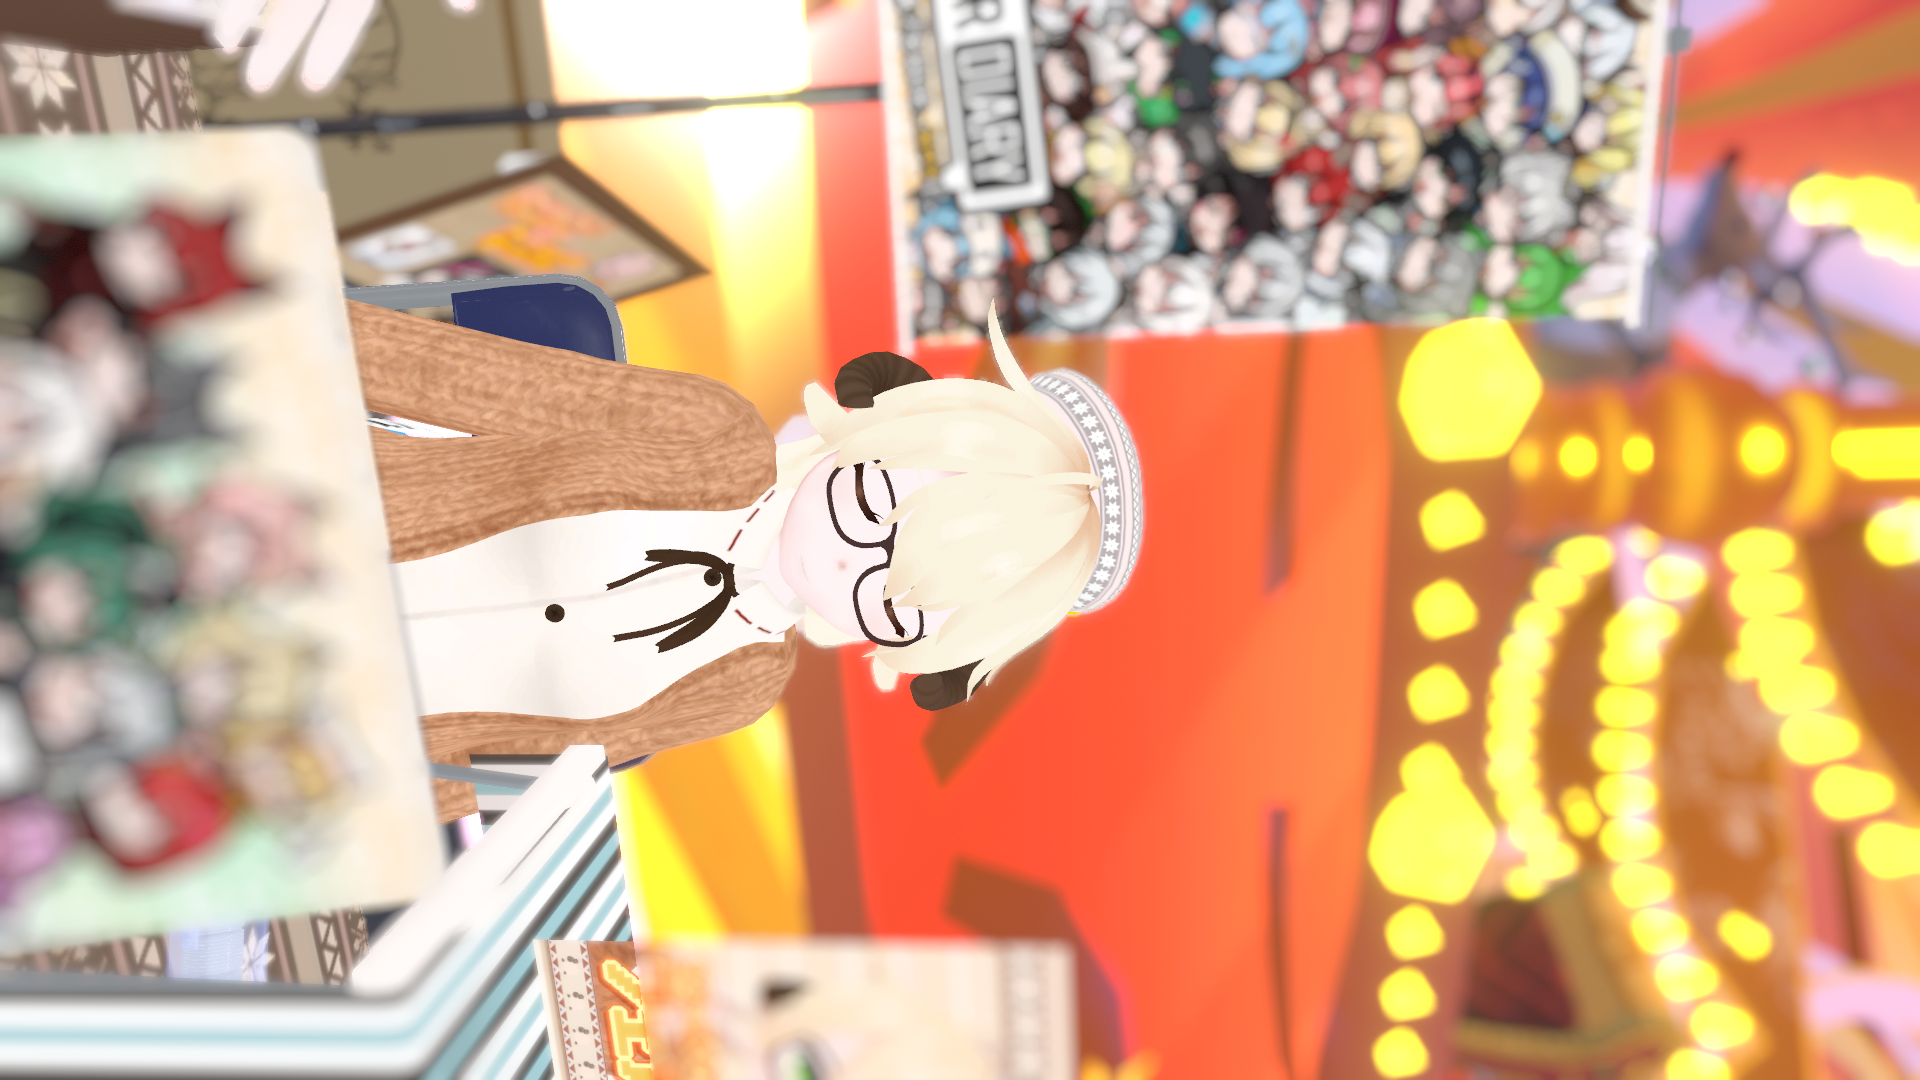 VRChat_1920x1080_2021-12-05_05-15-16.497.png